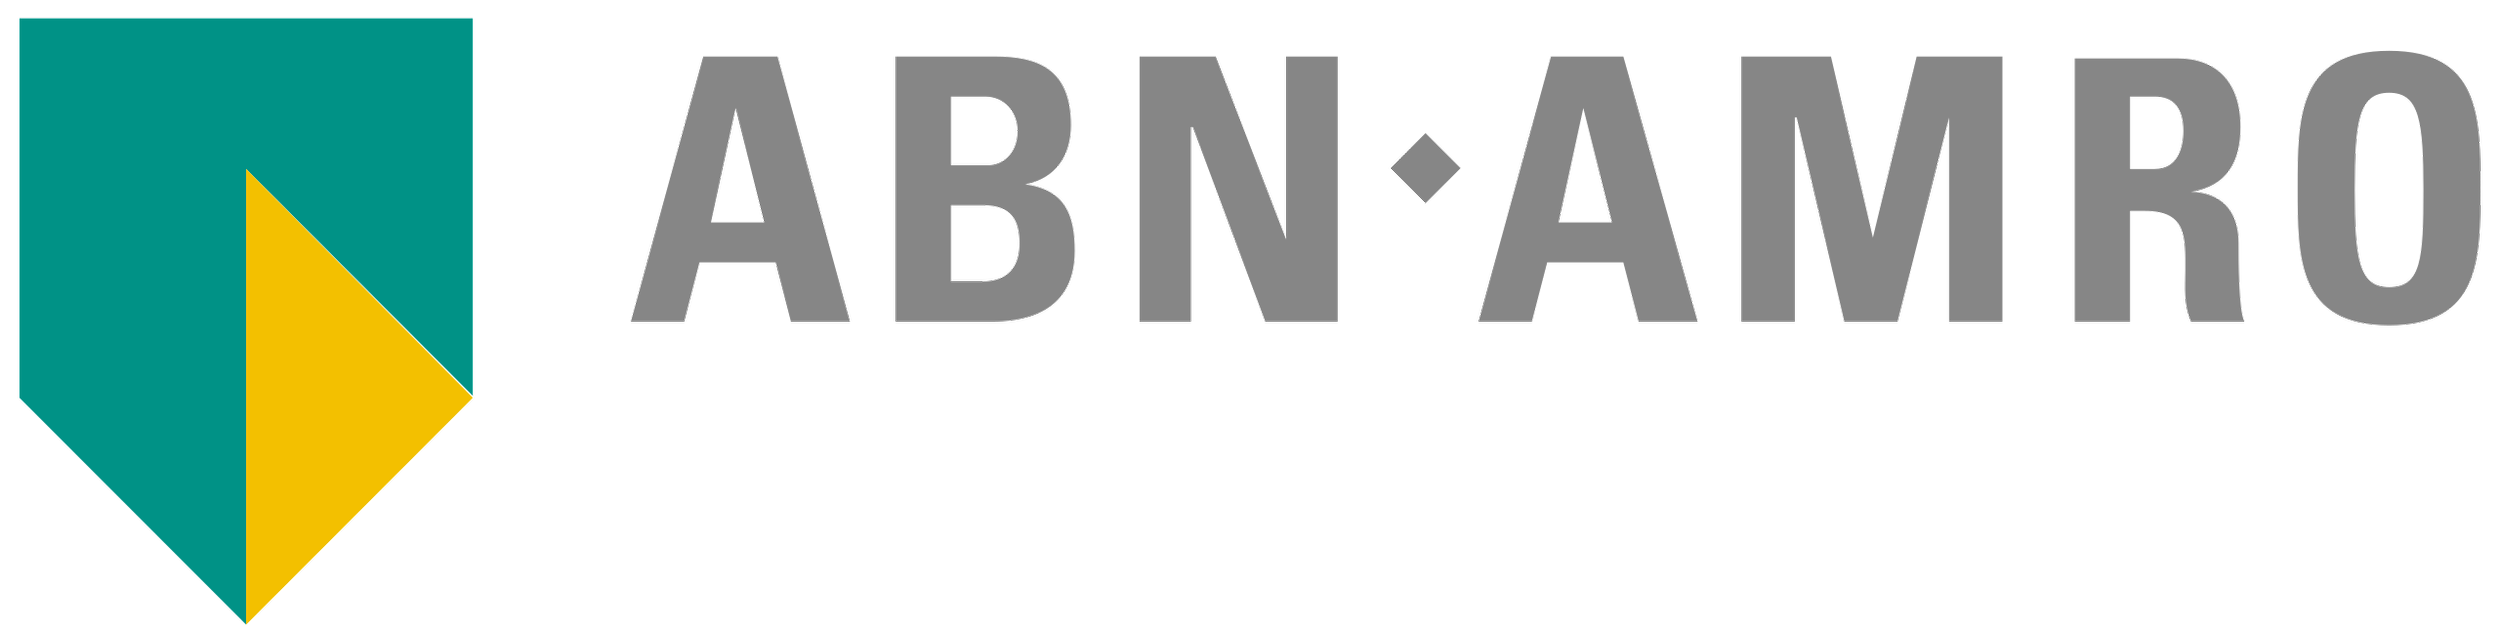 ABN-AMRO_Logo_new_colors.svg.png